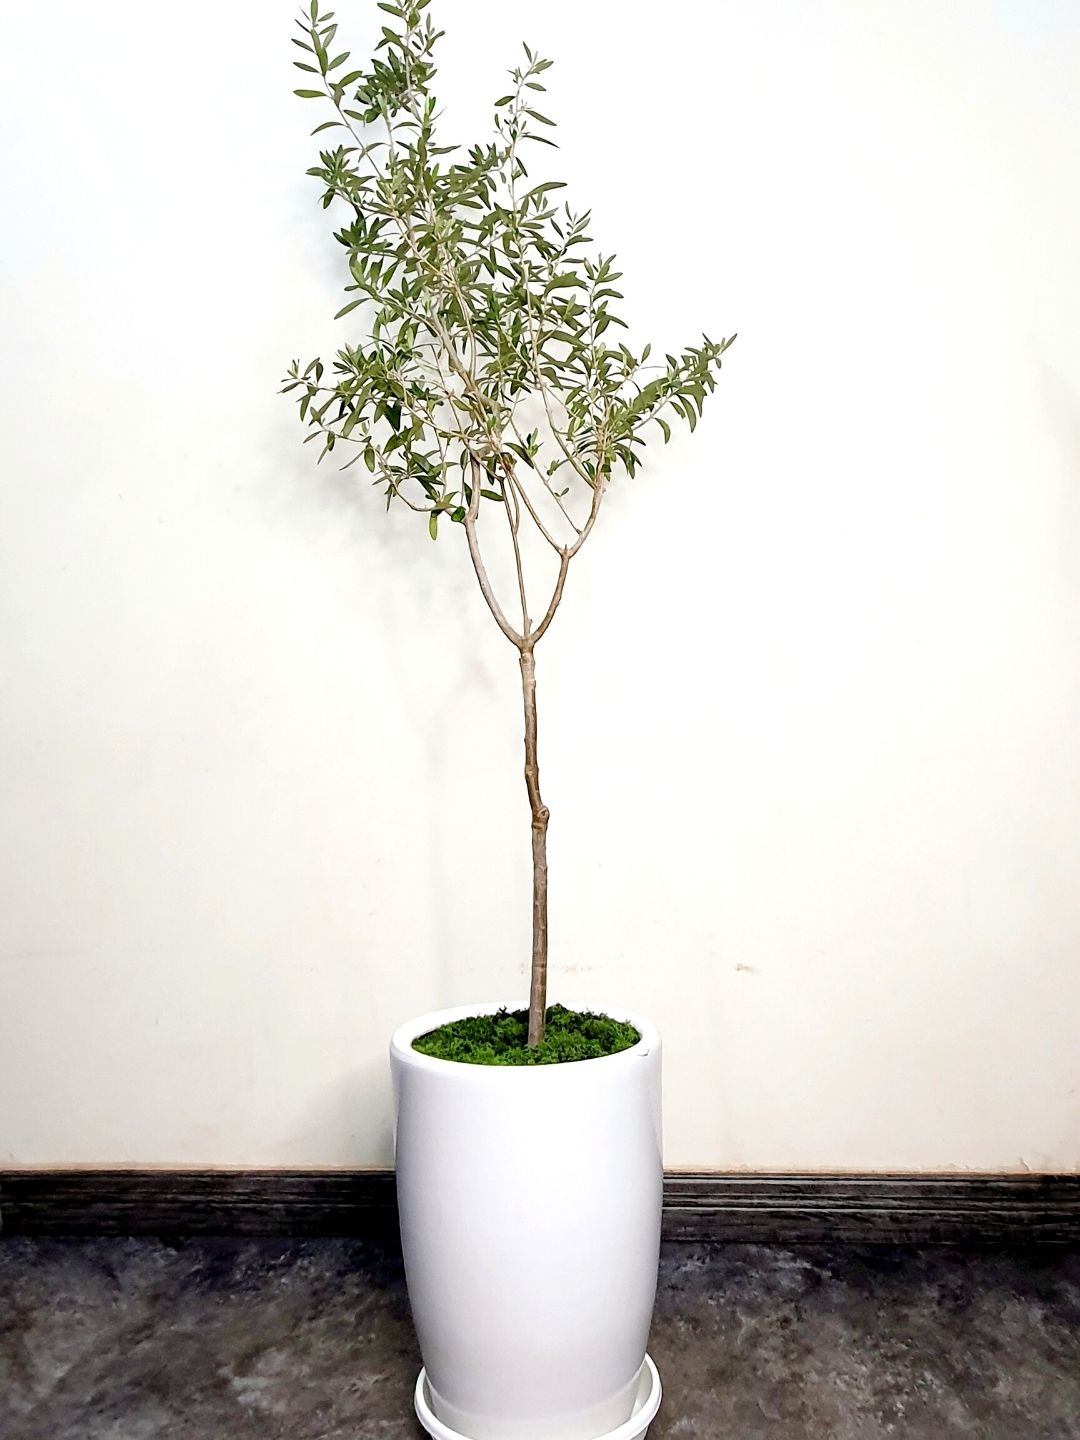 Sleek Stem XL Indoor Olive Tree: Resilience in a Stylish Ceramic Pot